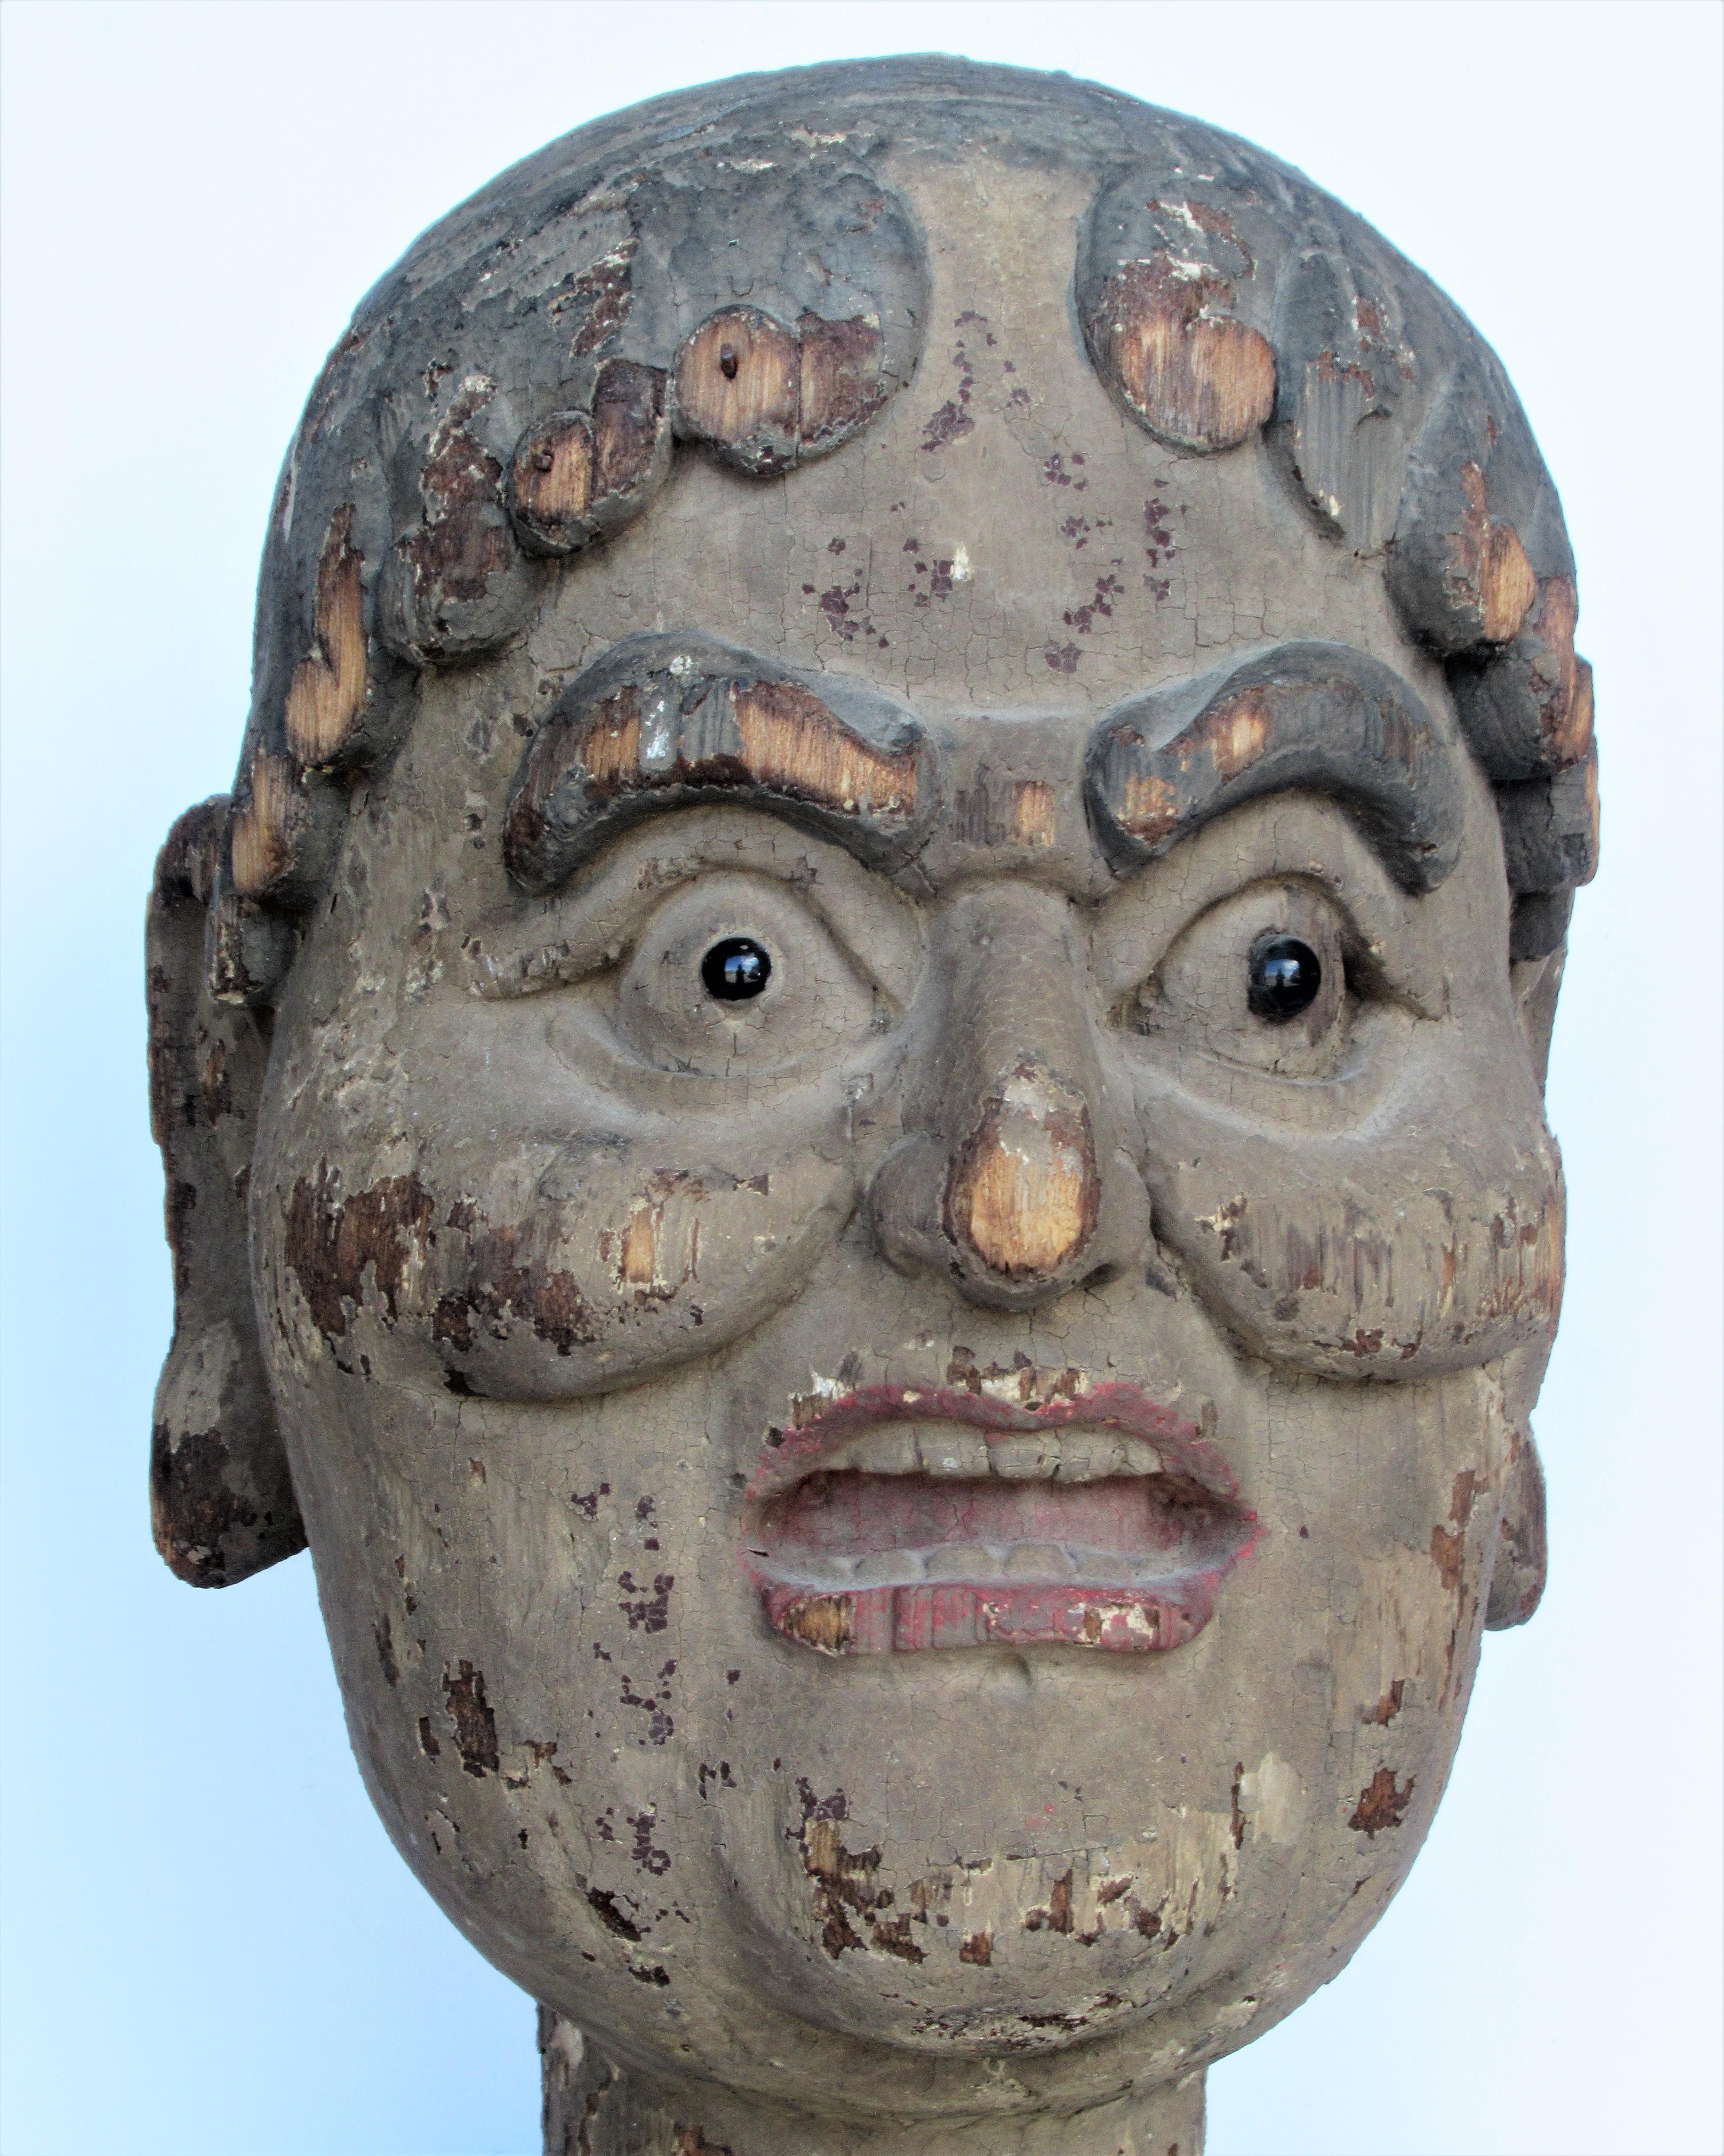 Early antique Chinese life size carved wooden head of  Luohan  ( Lohan, Arhat ) a disciple of Buddha who has reached enlightenment and achieved nirvana. Black glass eyes / beautifully aged worn polychrome painted surface / some remnants of